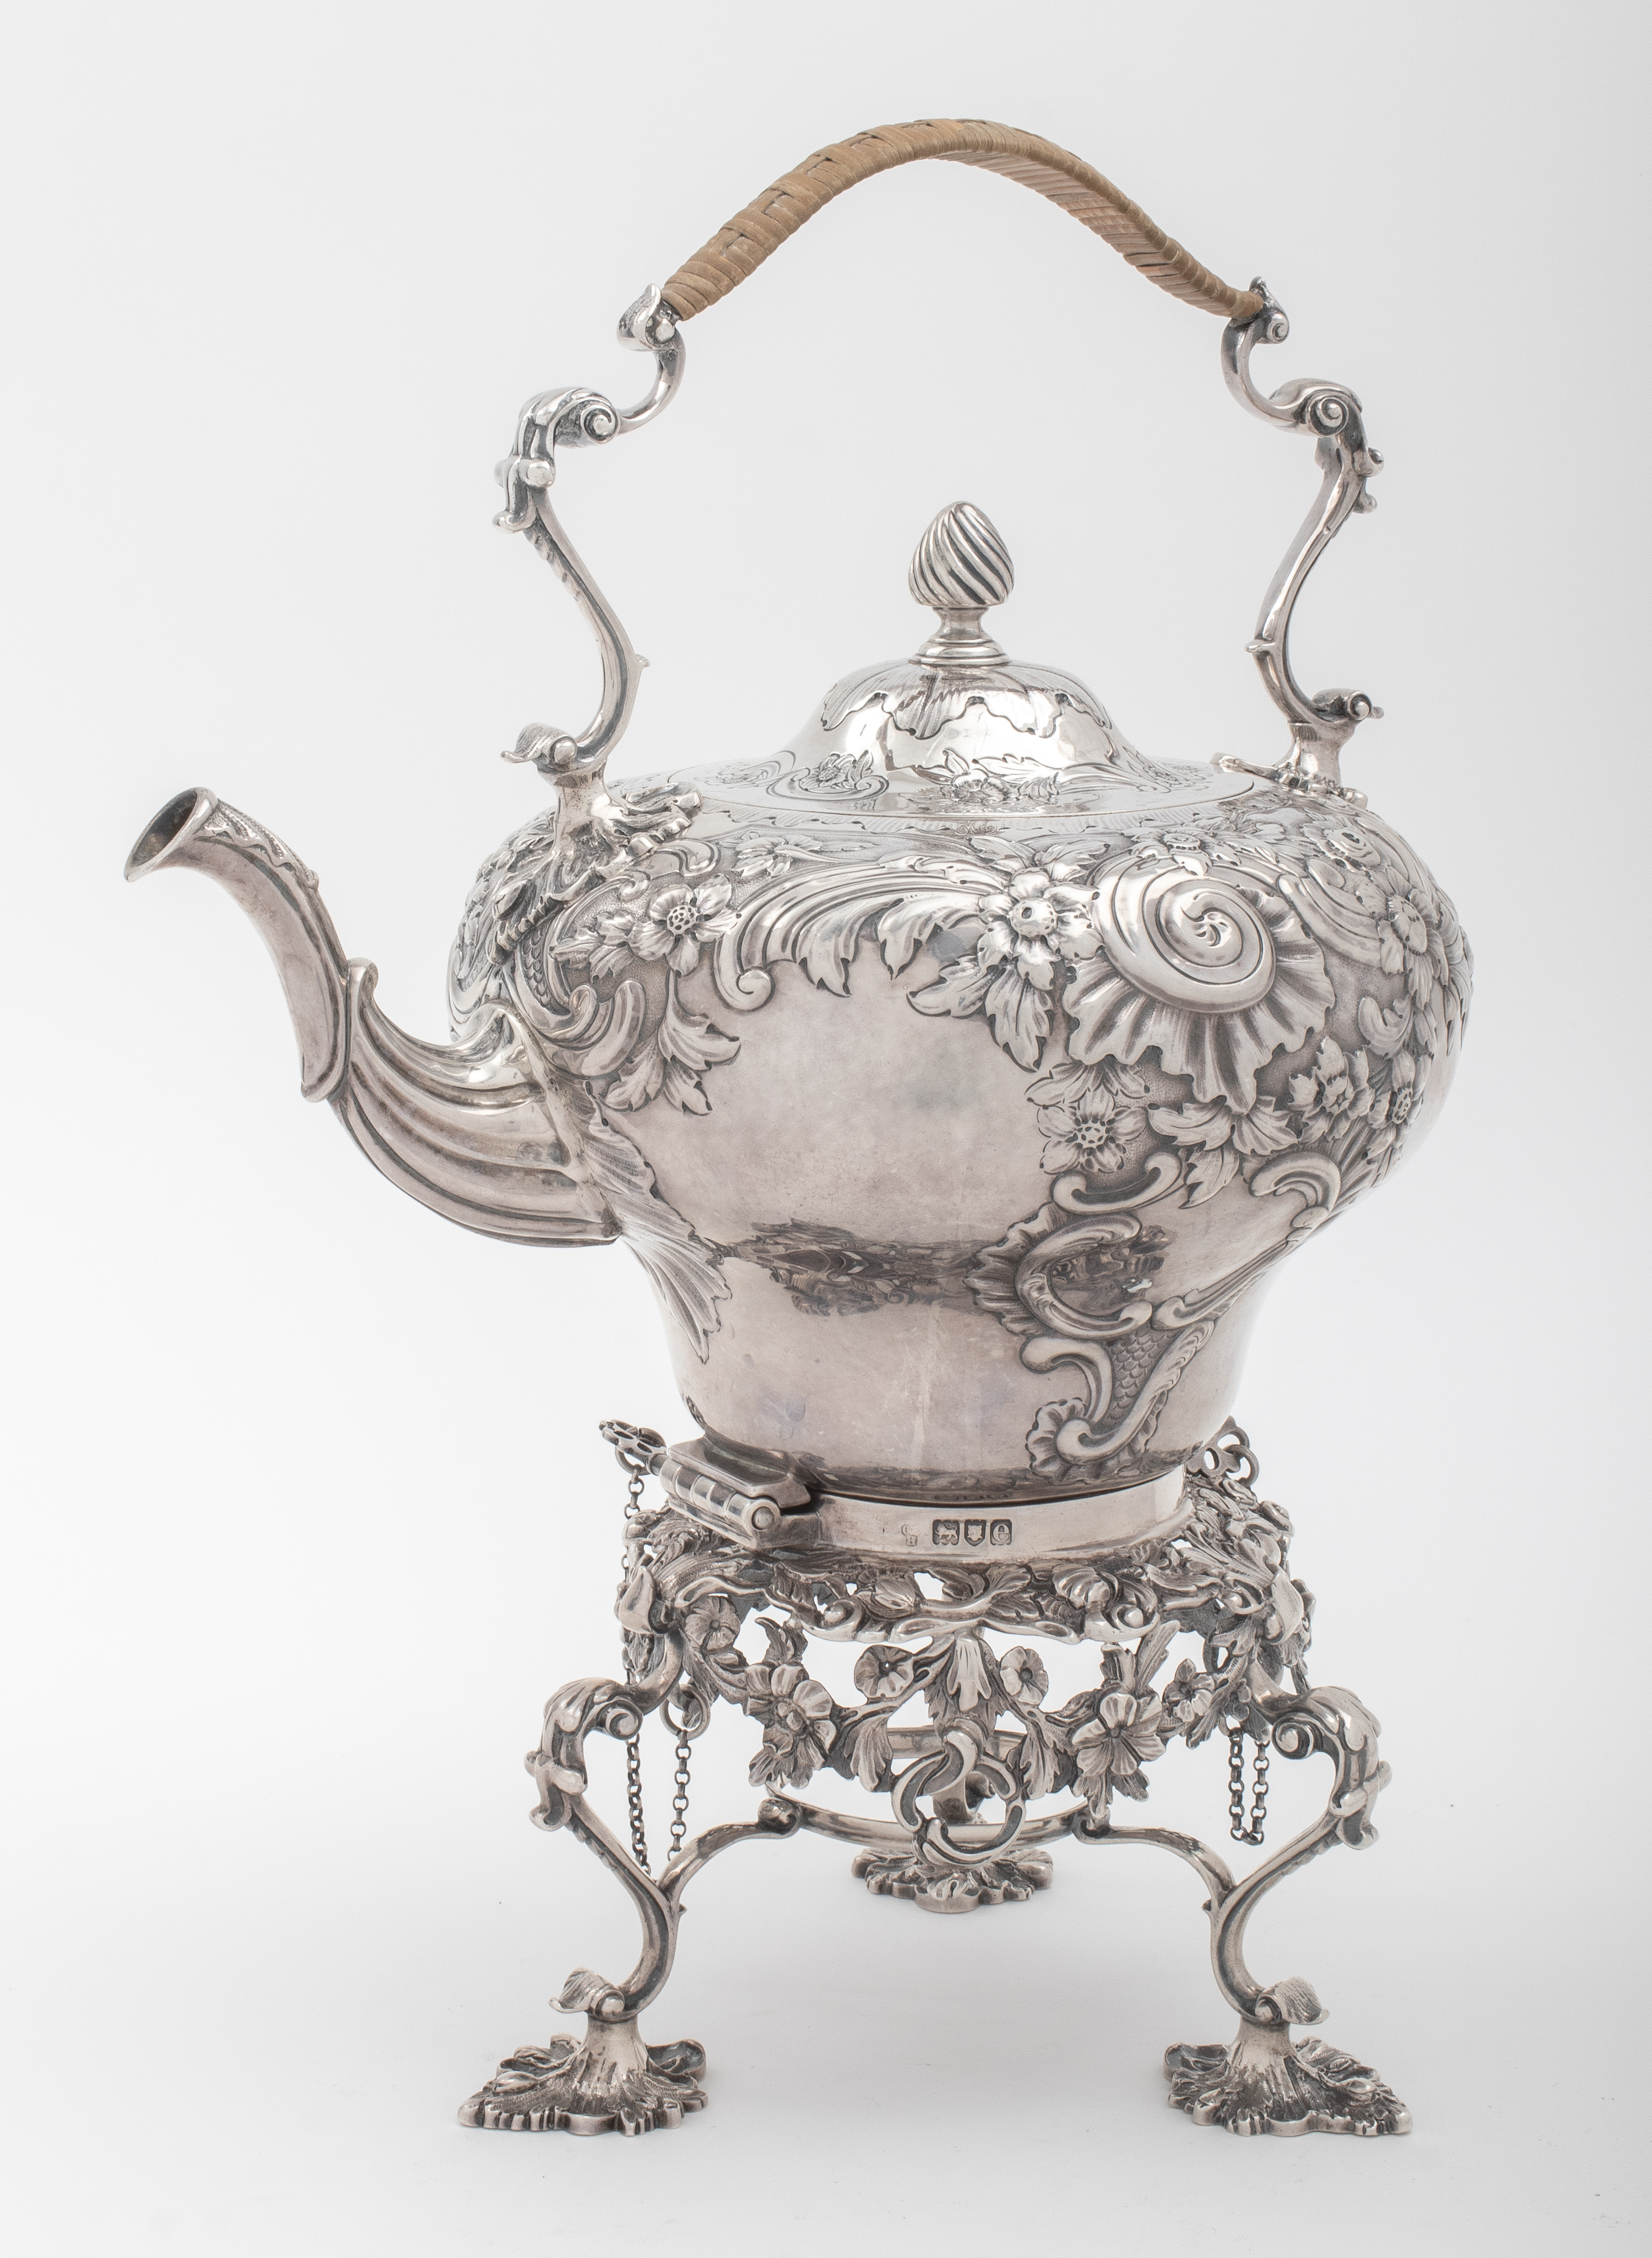 VICTORIAN STERLING SILVER KETTLE